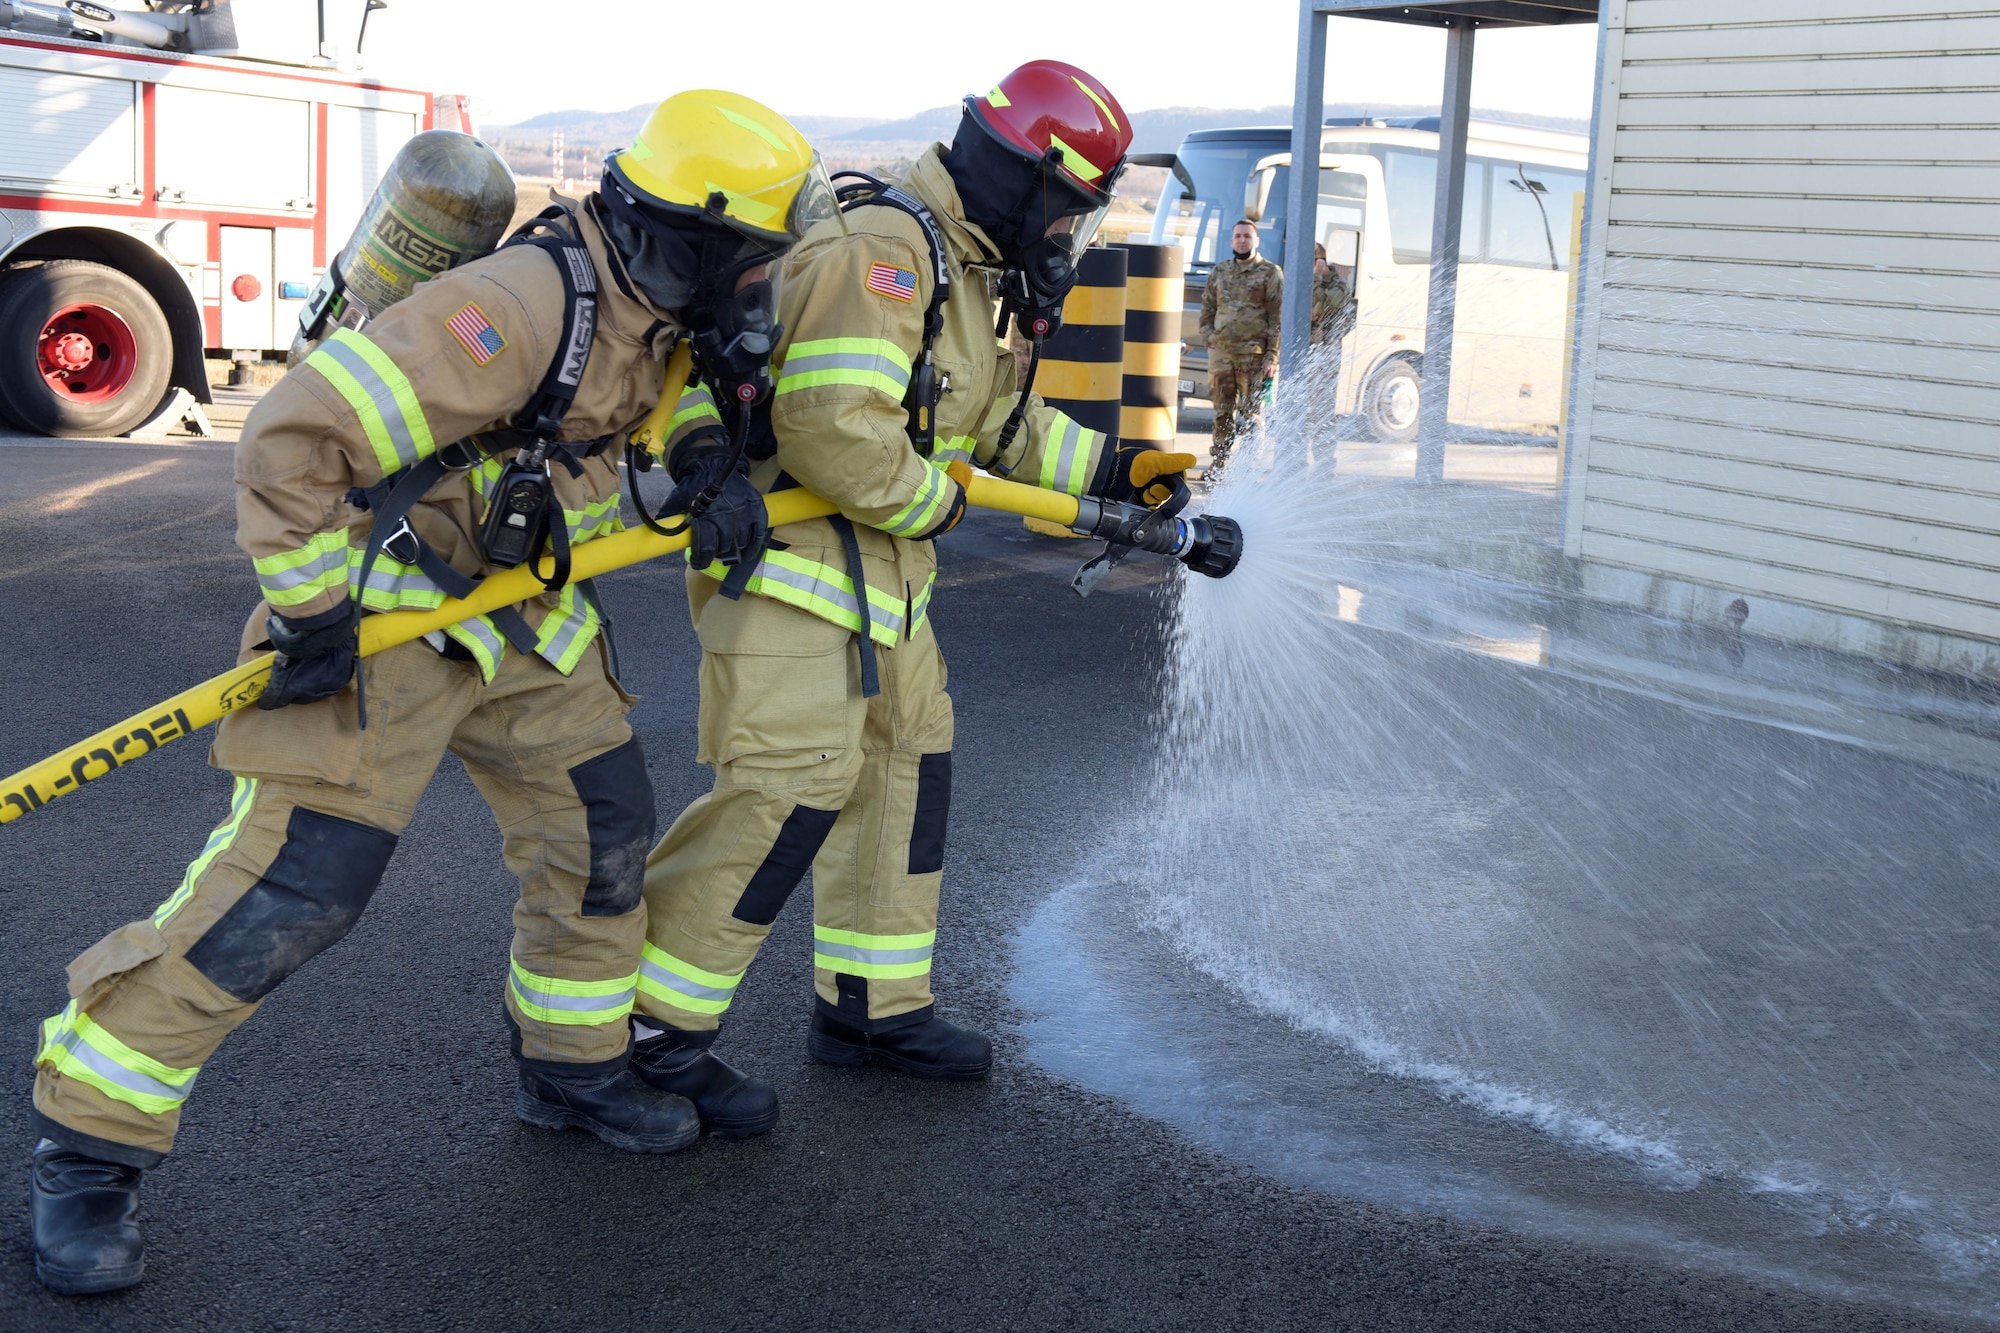 Two men use a fire hose